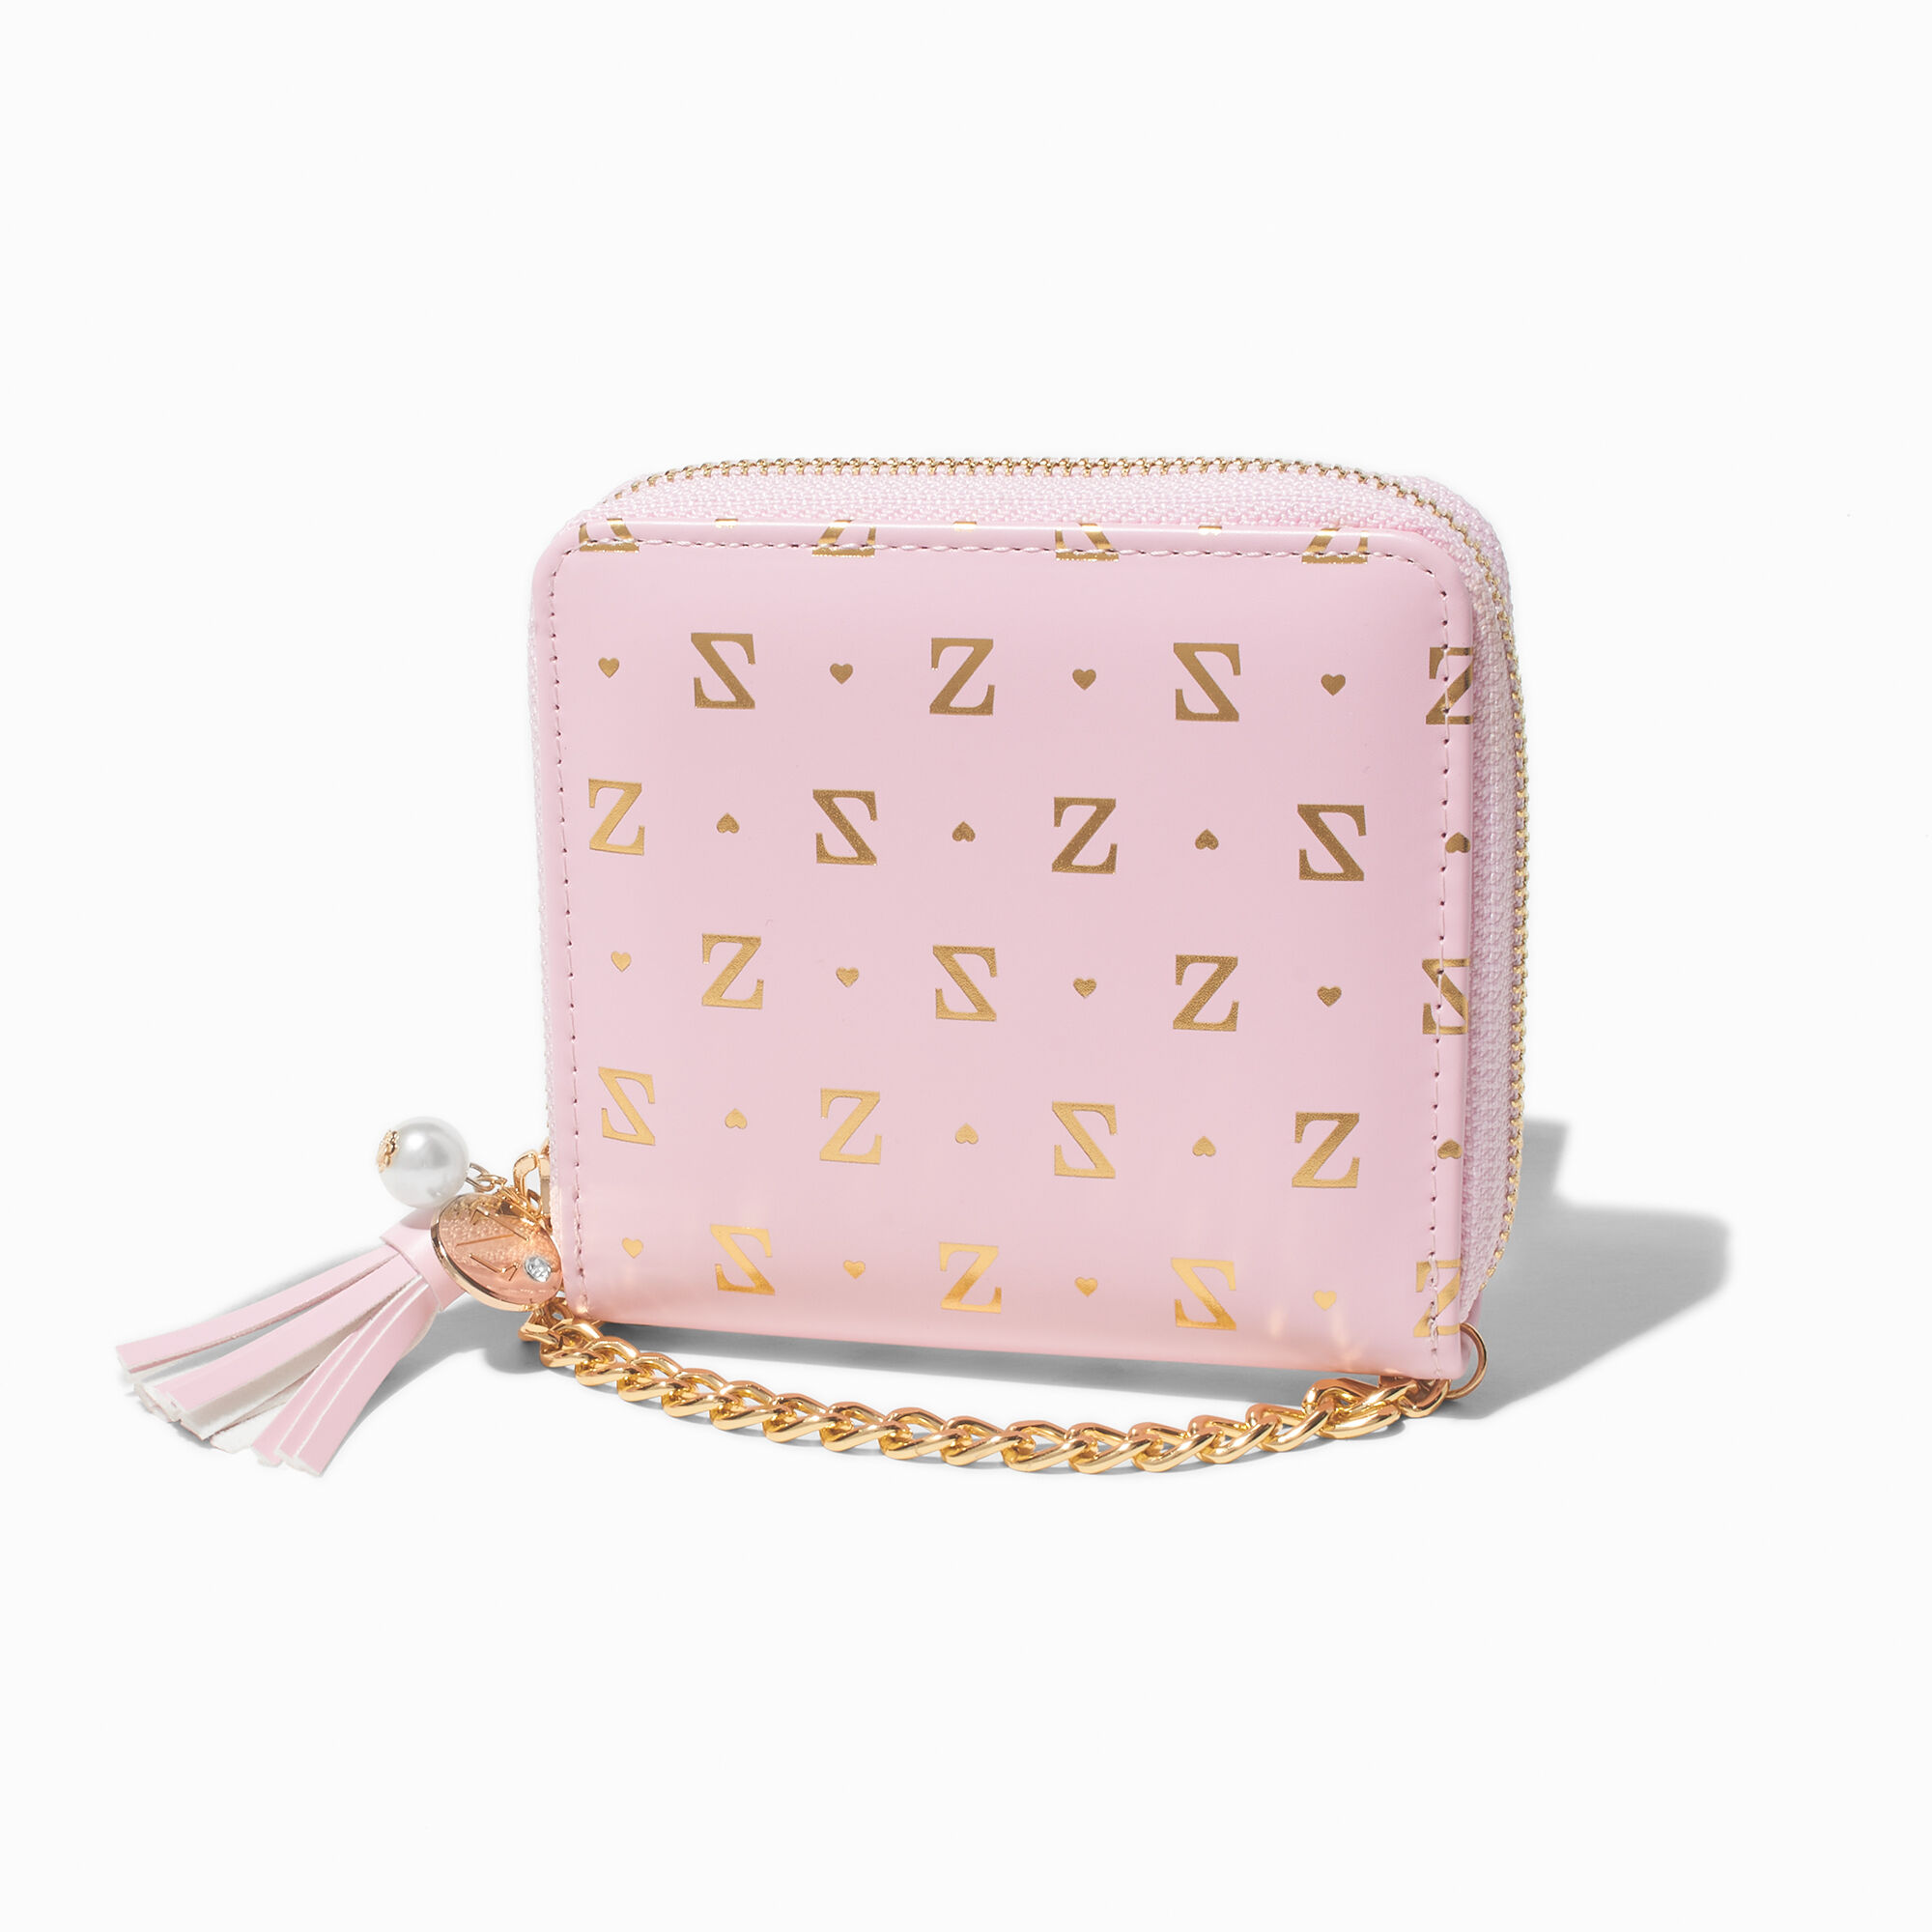 View Claires en Initial ChainStrap Wallet Z Gold information